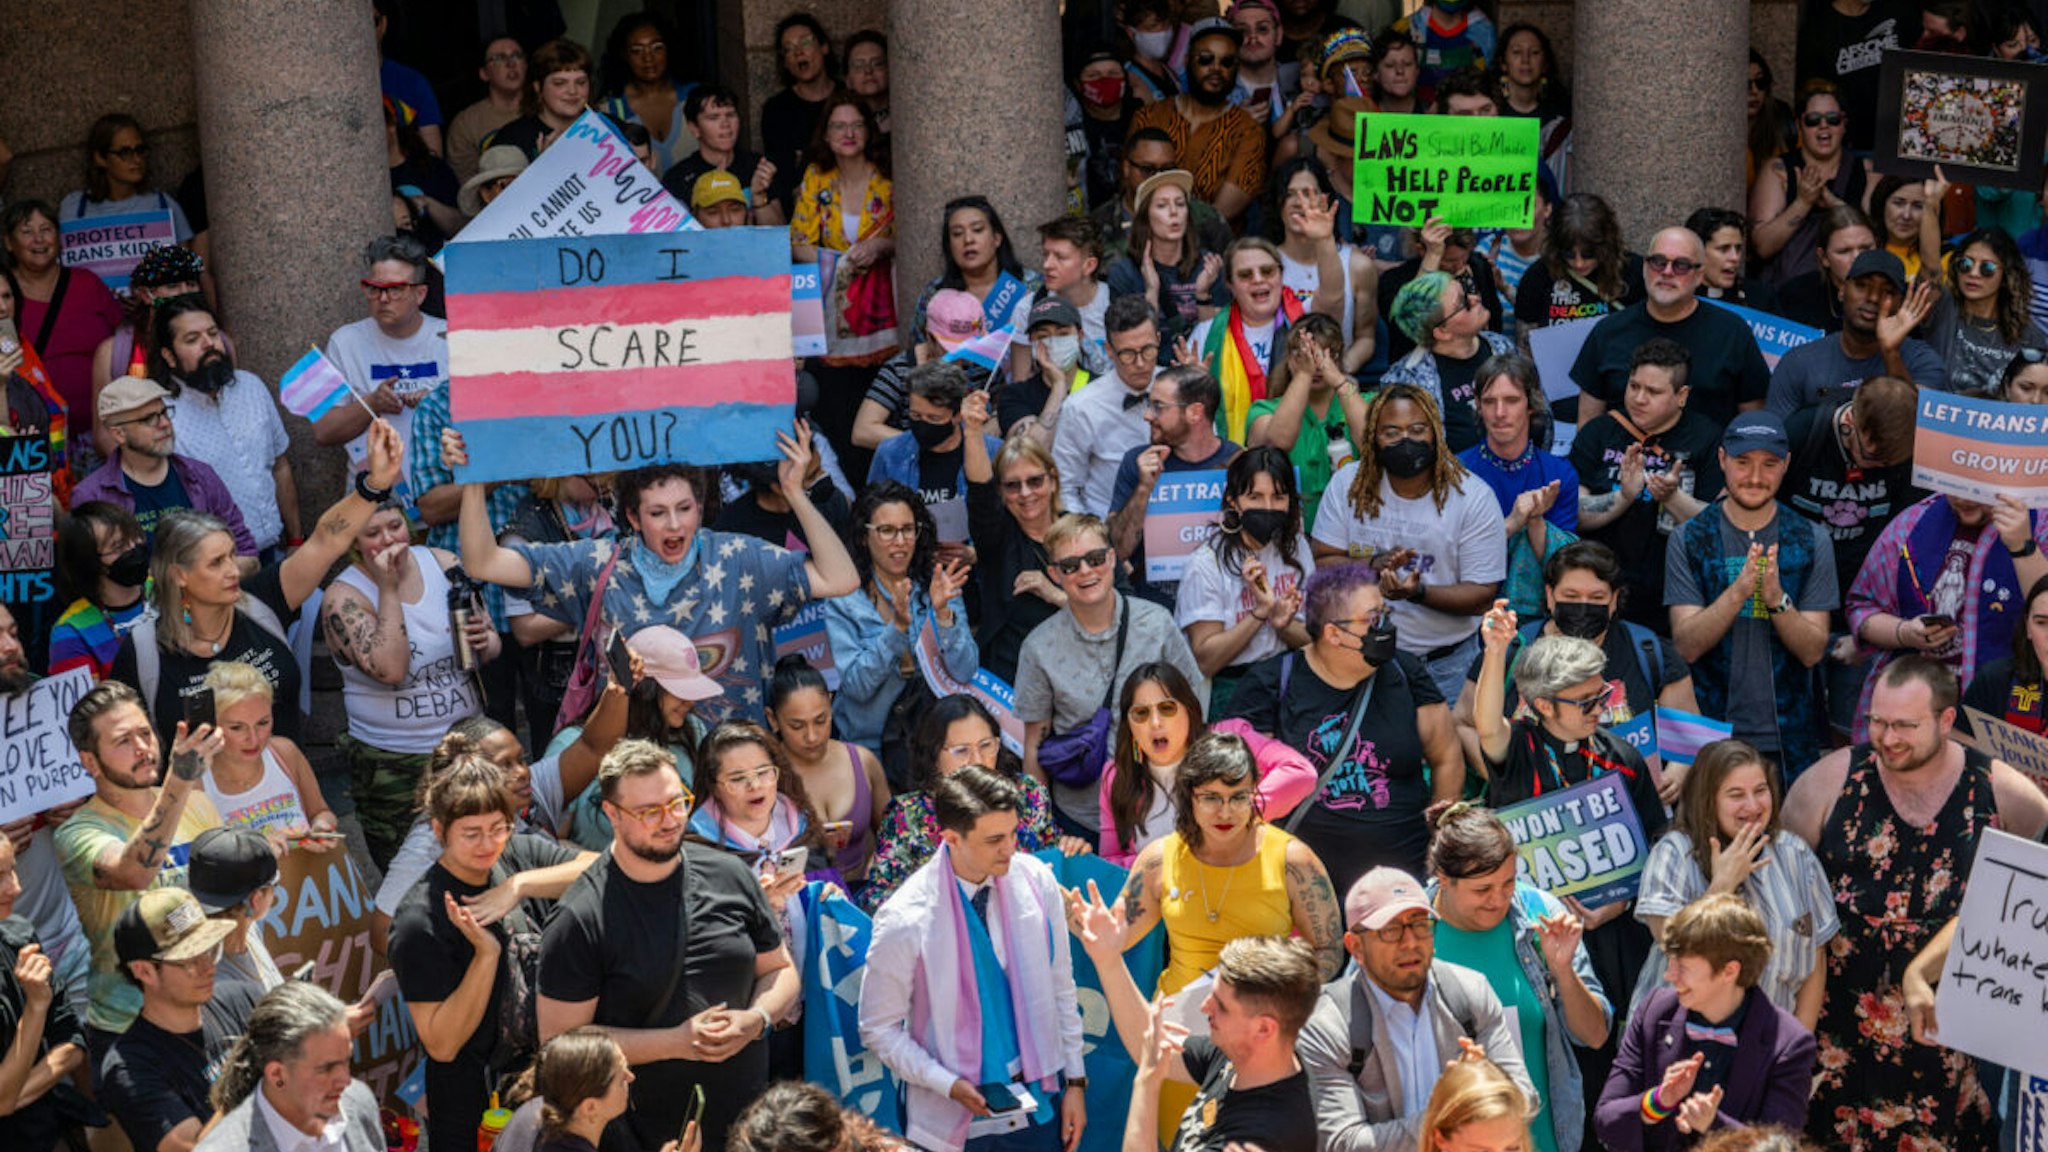 AUSTIN, TEXAS - MARCH 27: People protest bills HB 1686 and SB 14 during a 'Fight For Our Lives' rally at the Texas State Capitol on March 27, 2023 in Austin, Texas. Community members and activists gathered at the Capitol to protest the bills, which seek to limit healthcare to transgender youth.